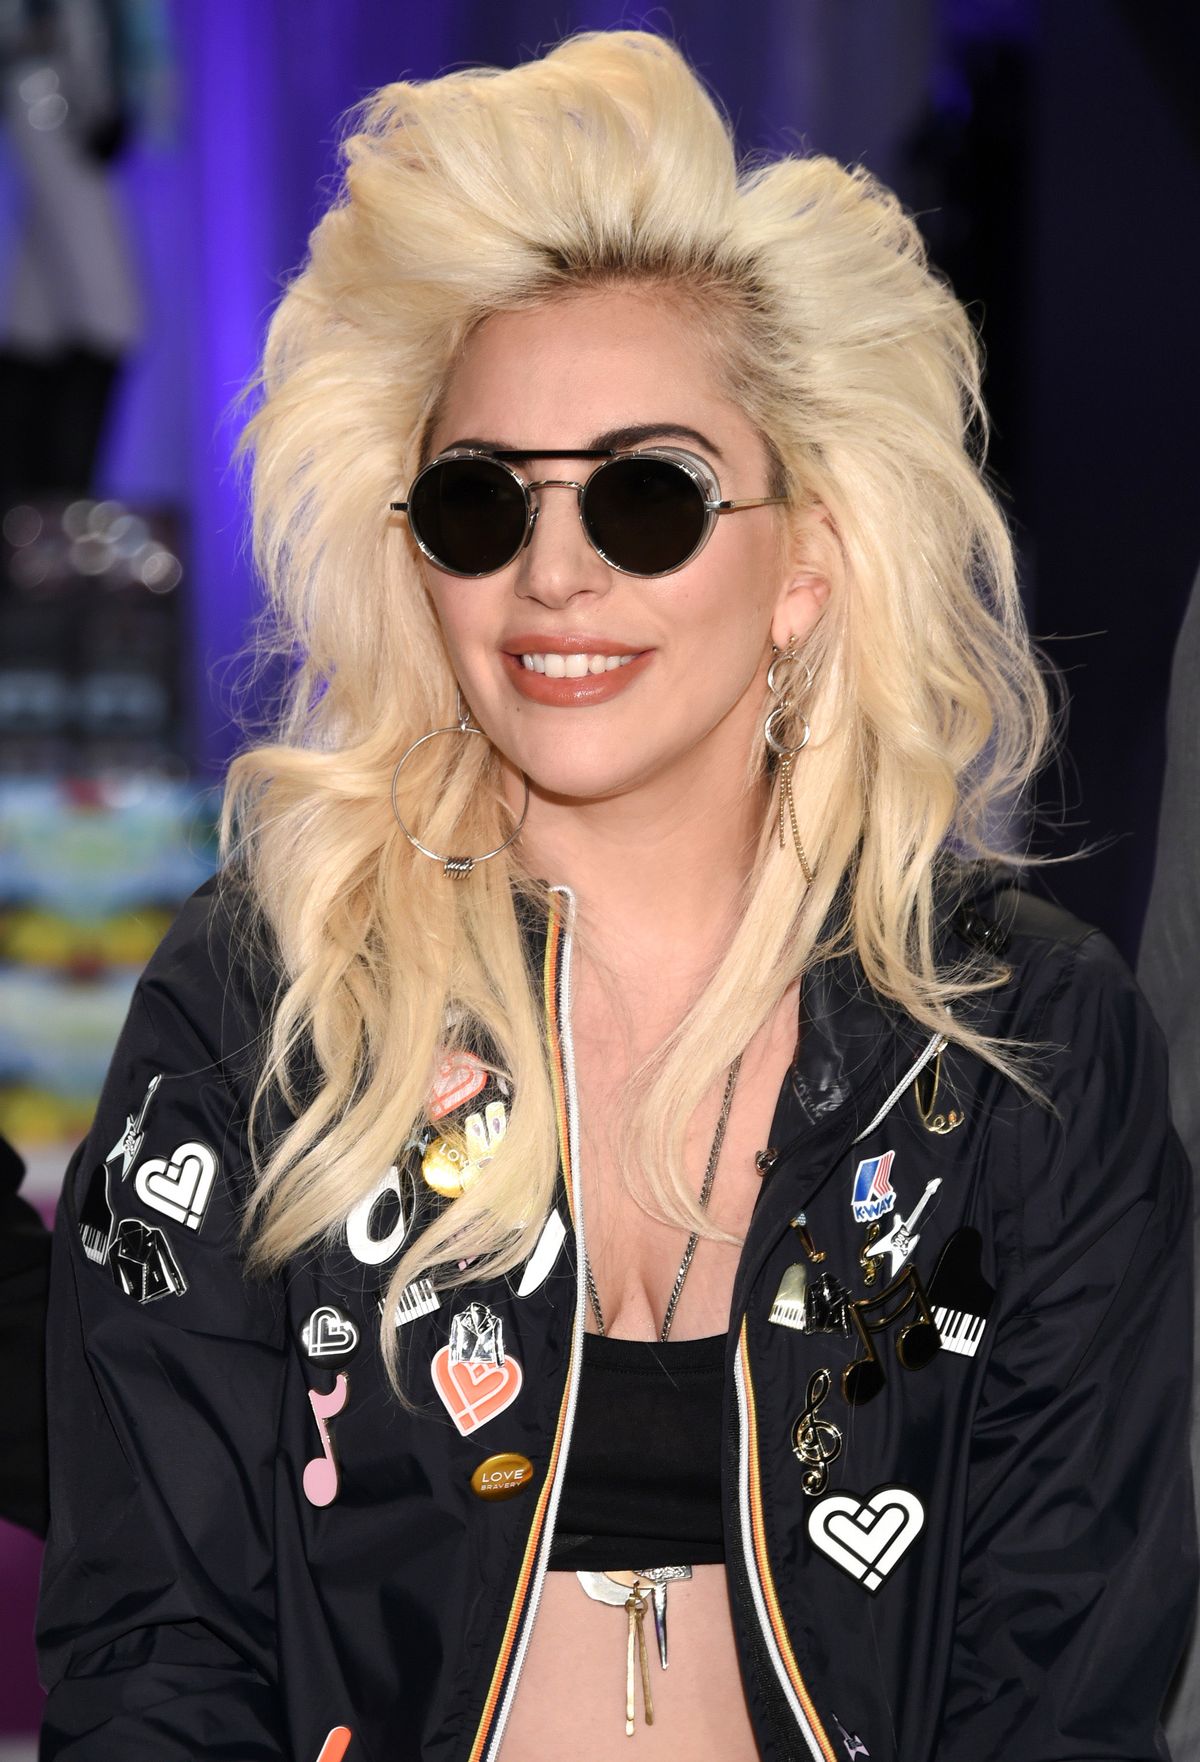 File- This May 4, 2016, file photo shows recording artist Lady Gaga launching "Love Bravery" at Macy's Herald Square in New York. Lady Gagas childhood piano which she used to write her first song at age 5, didnt hit a note at an auction in New York. The upright piano didnt meet its reserve price Saturday, May 21, 2016, when Los Angeles-based at Juliens Auctions offered it as part of the Music Icons memorabilia sale at the Hard Rock Cafe New York. The piano had a pre-sale estimate of between $100,000 and $200,000.  (Photo by Evan Agostini/Invision/AP, File) (Evan Agostini/invision/ap)